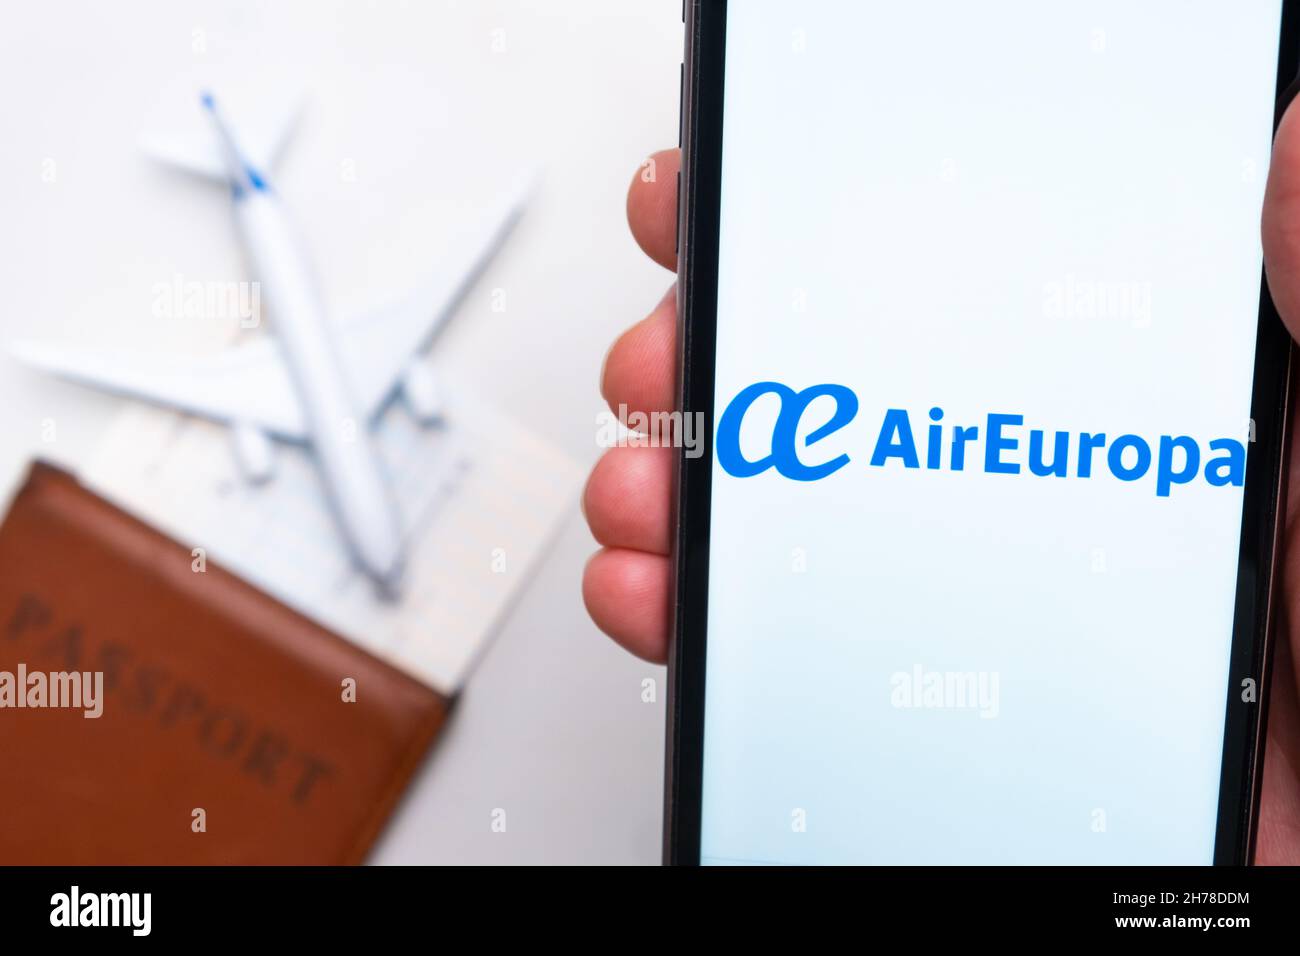 AirEuropa Airline app on a smartphone screen in mans hand. A toy plane, passport and tickets are on the table. November 2021, San Francisco, USA Stock Photo